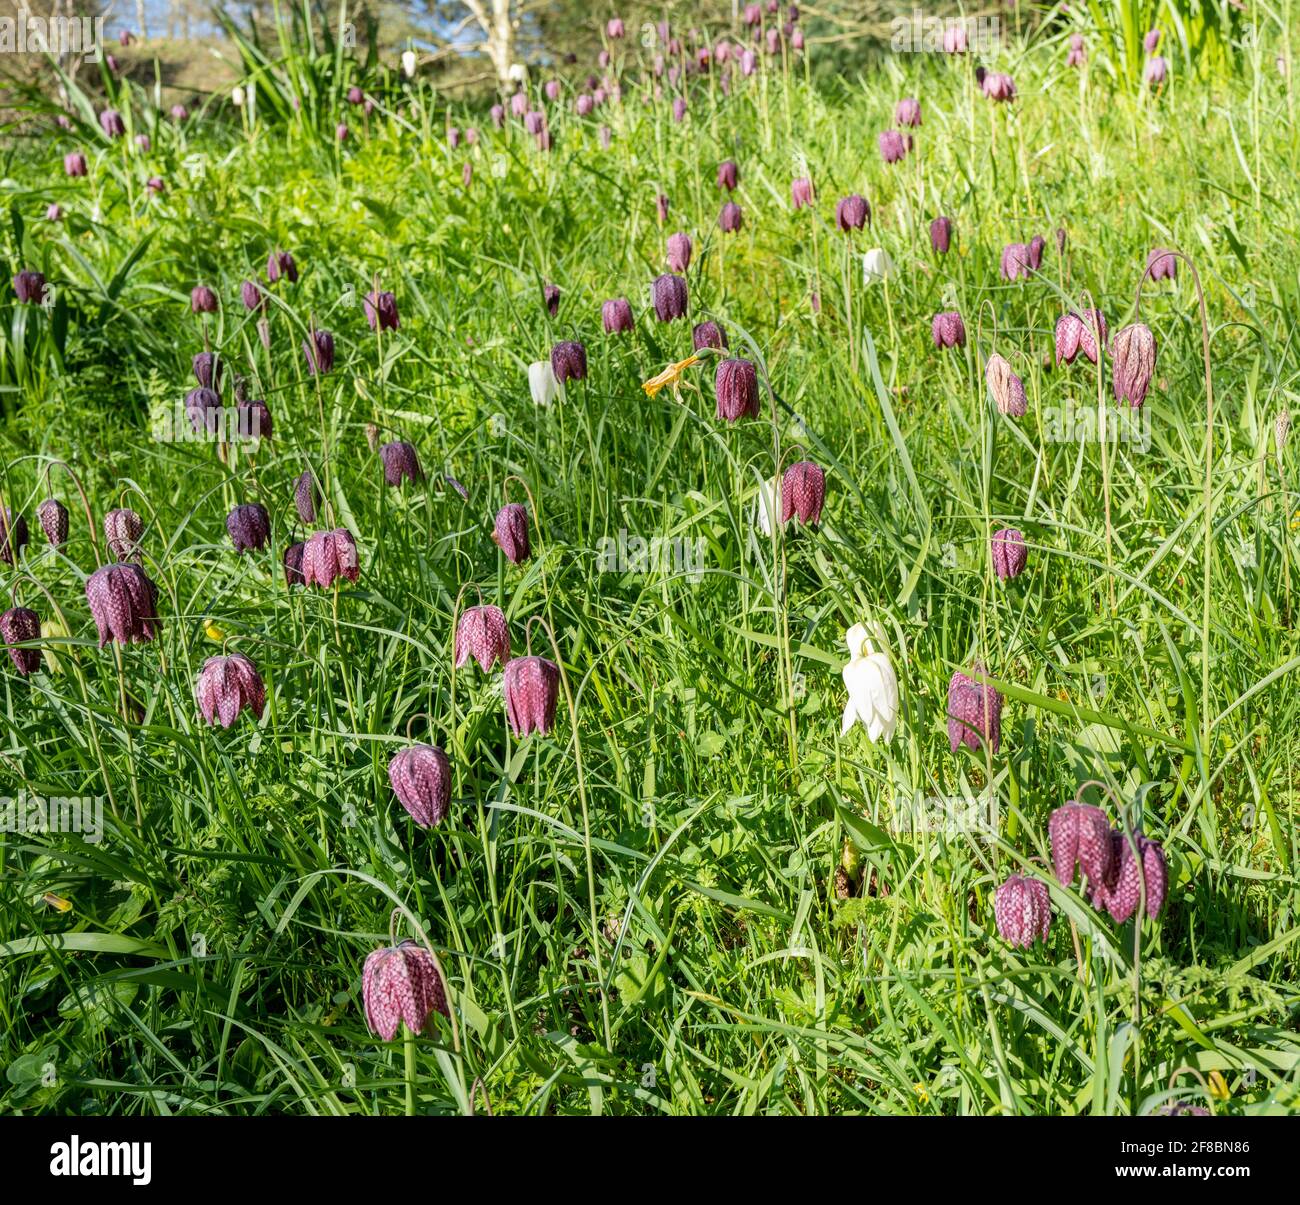 An English woodland with Snakes Head Fritillary flowers. Stock Photo